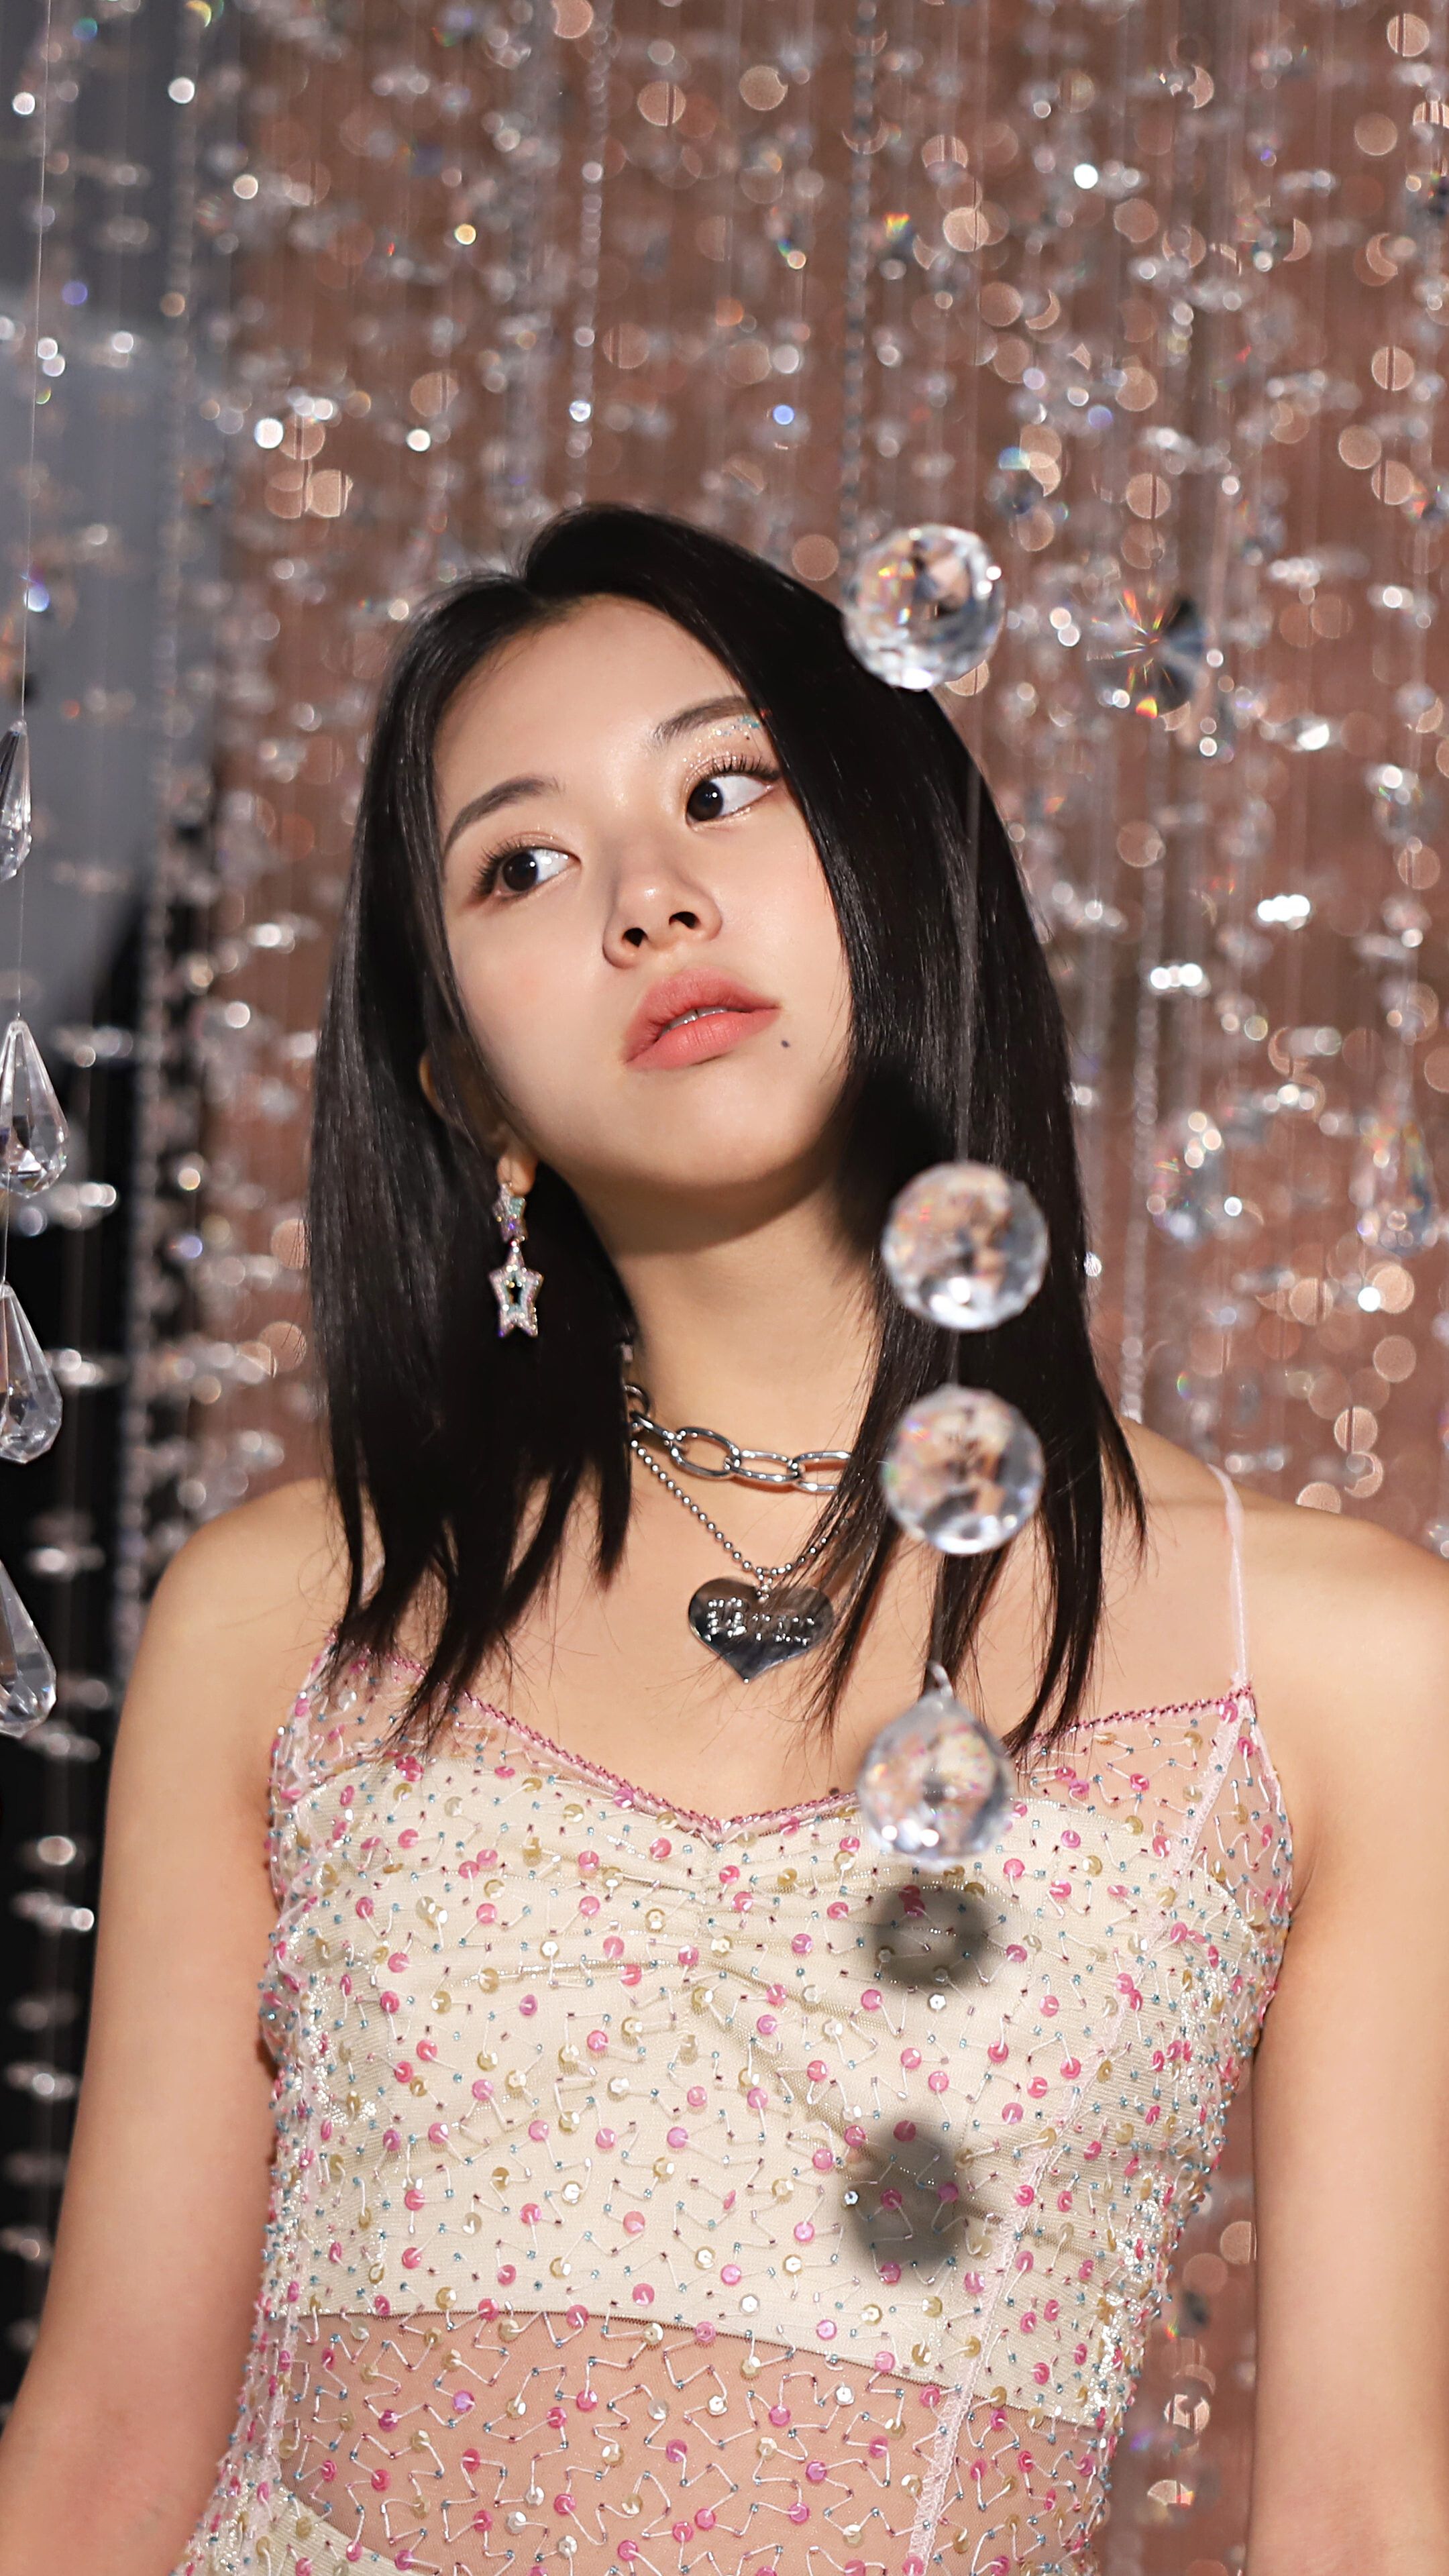 Chaeyoung HD wallpaper, Background